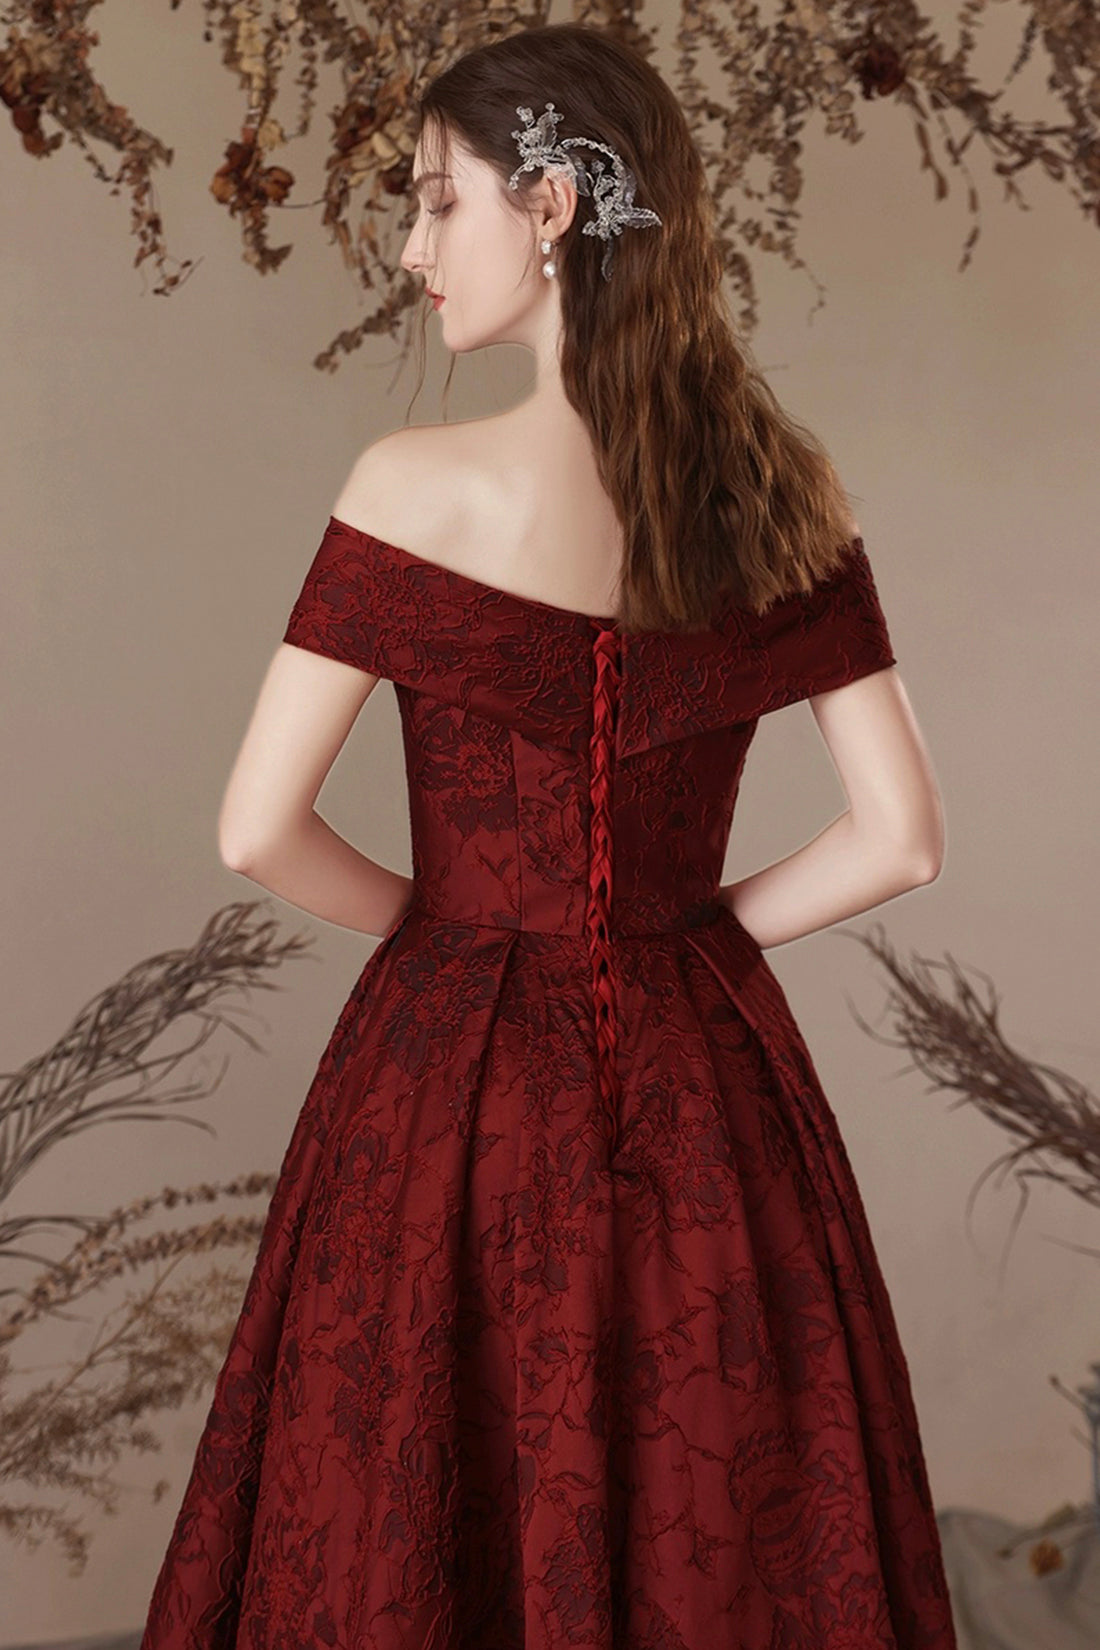 Burgundy Satin Long Prom Dress, Beautiful A-Line Off the Shoulder Evening Party Dress